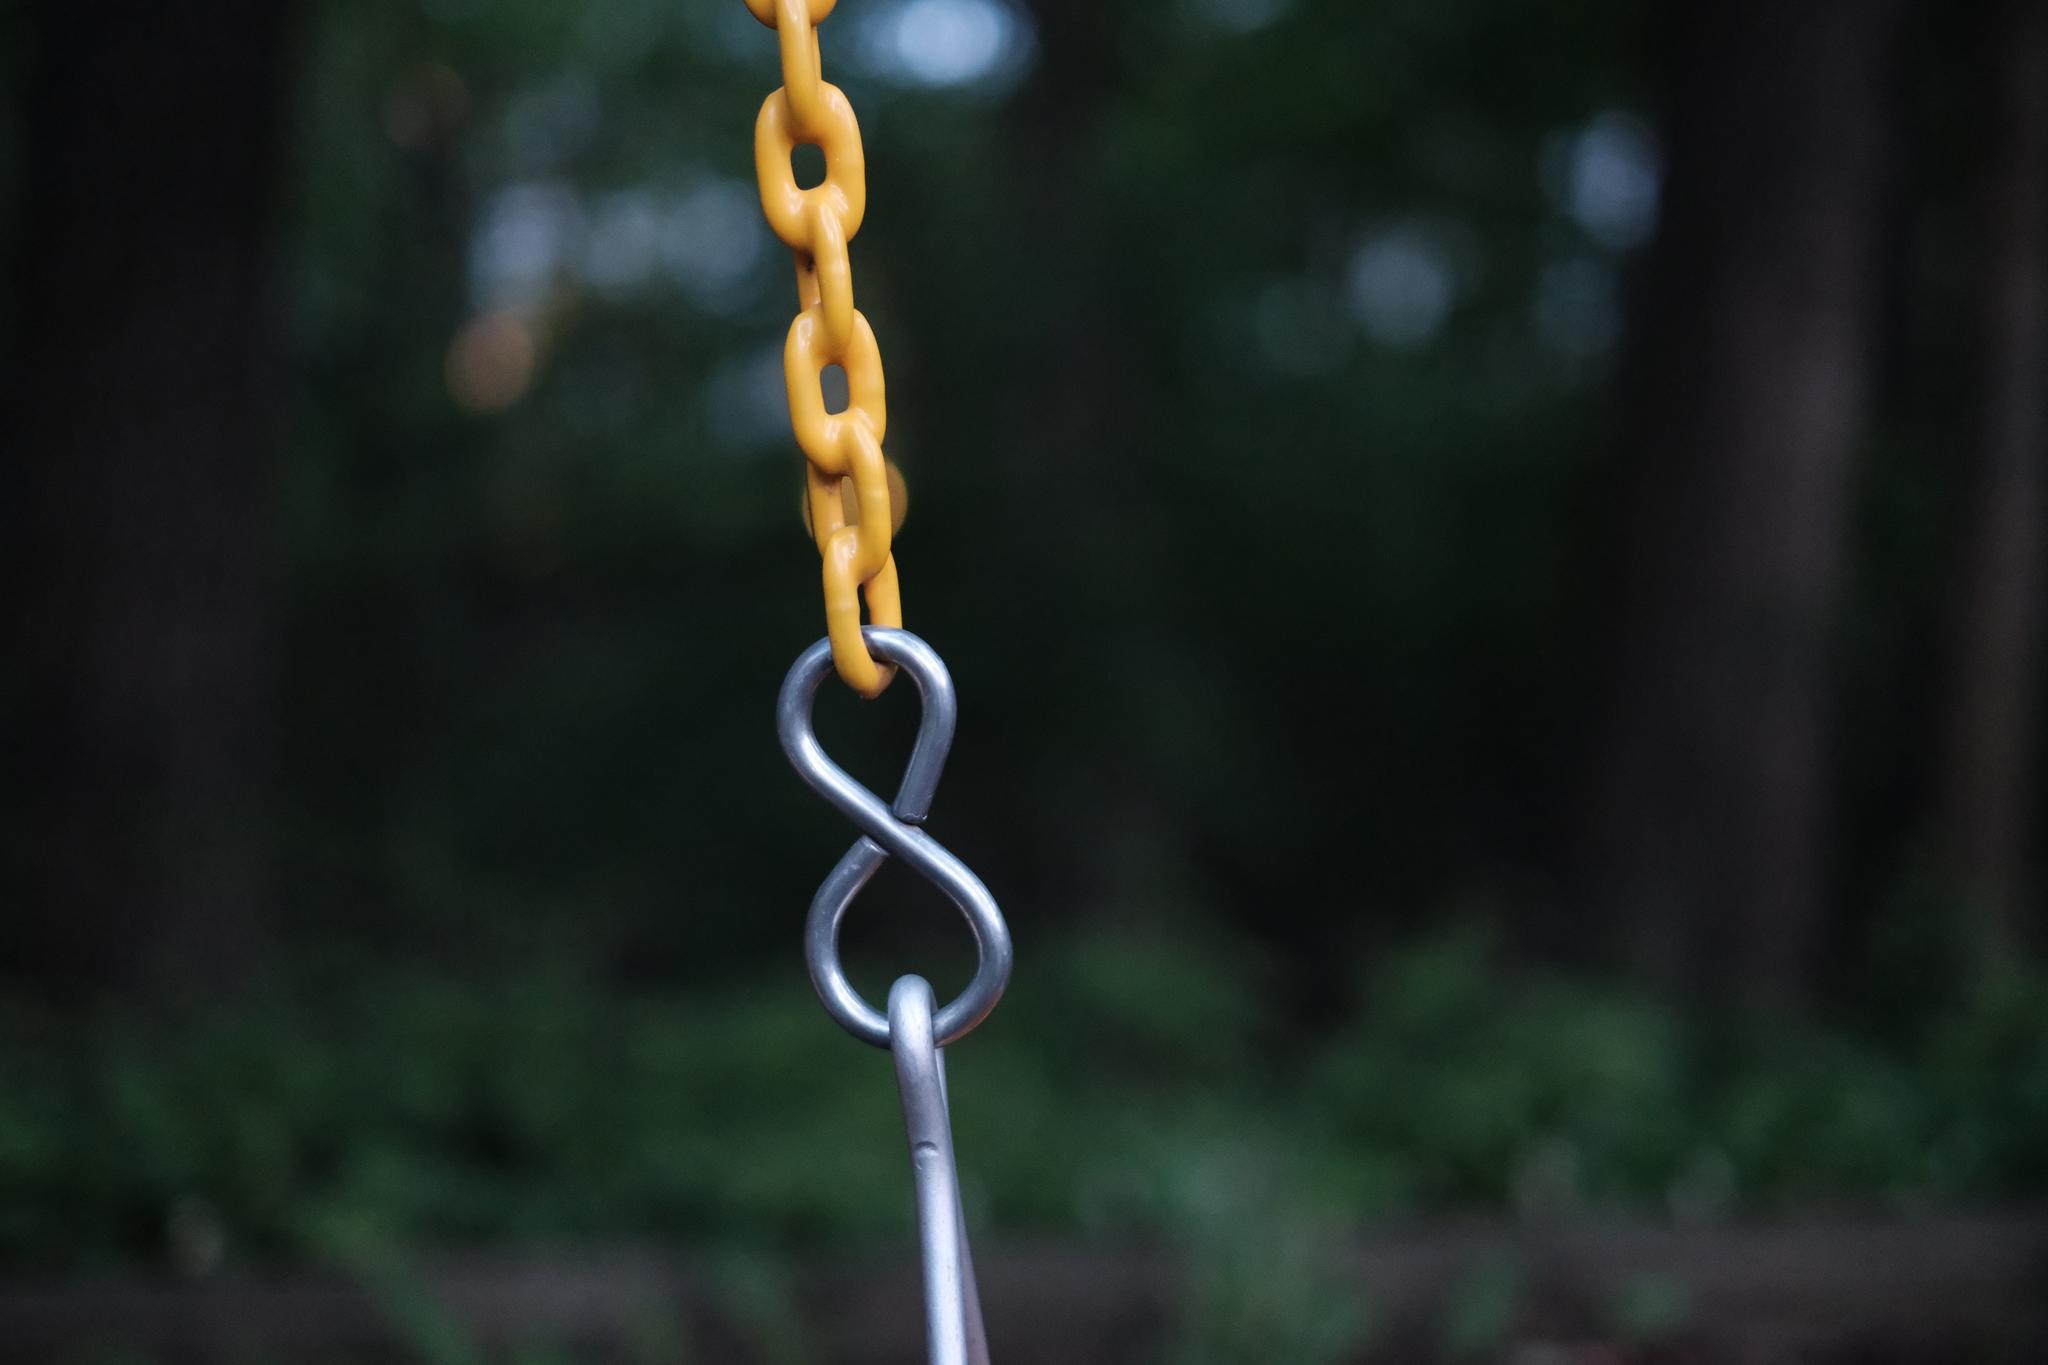 A yellow chain linked to a metal hook against a blurred natural background